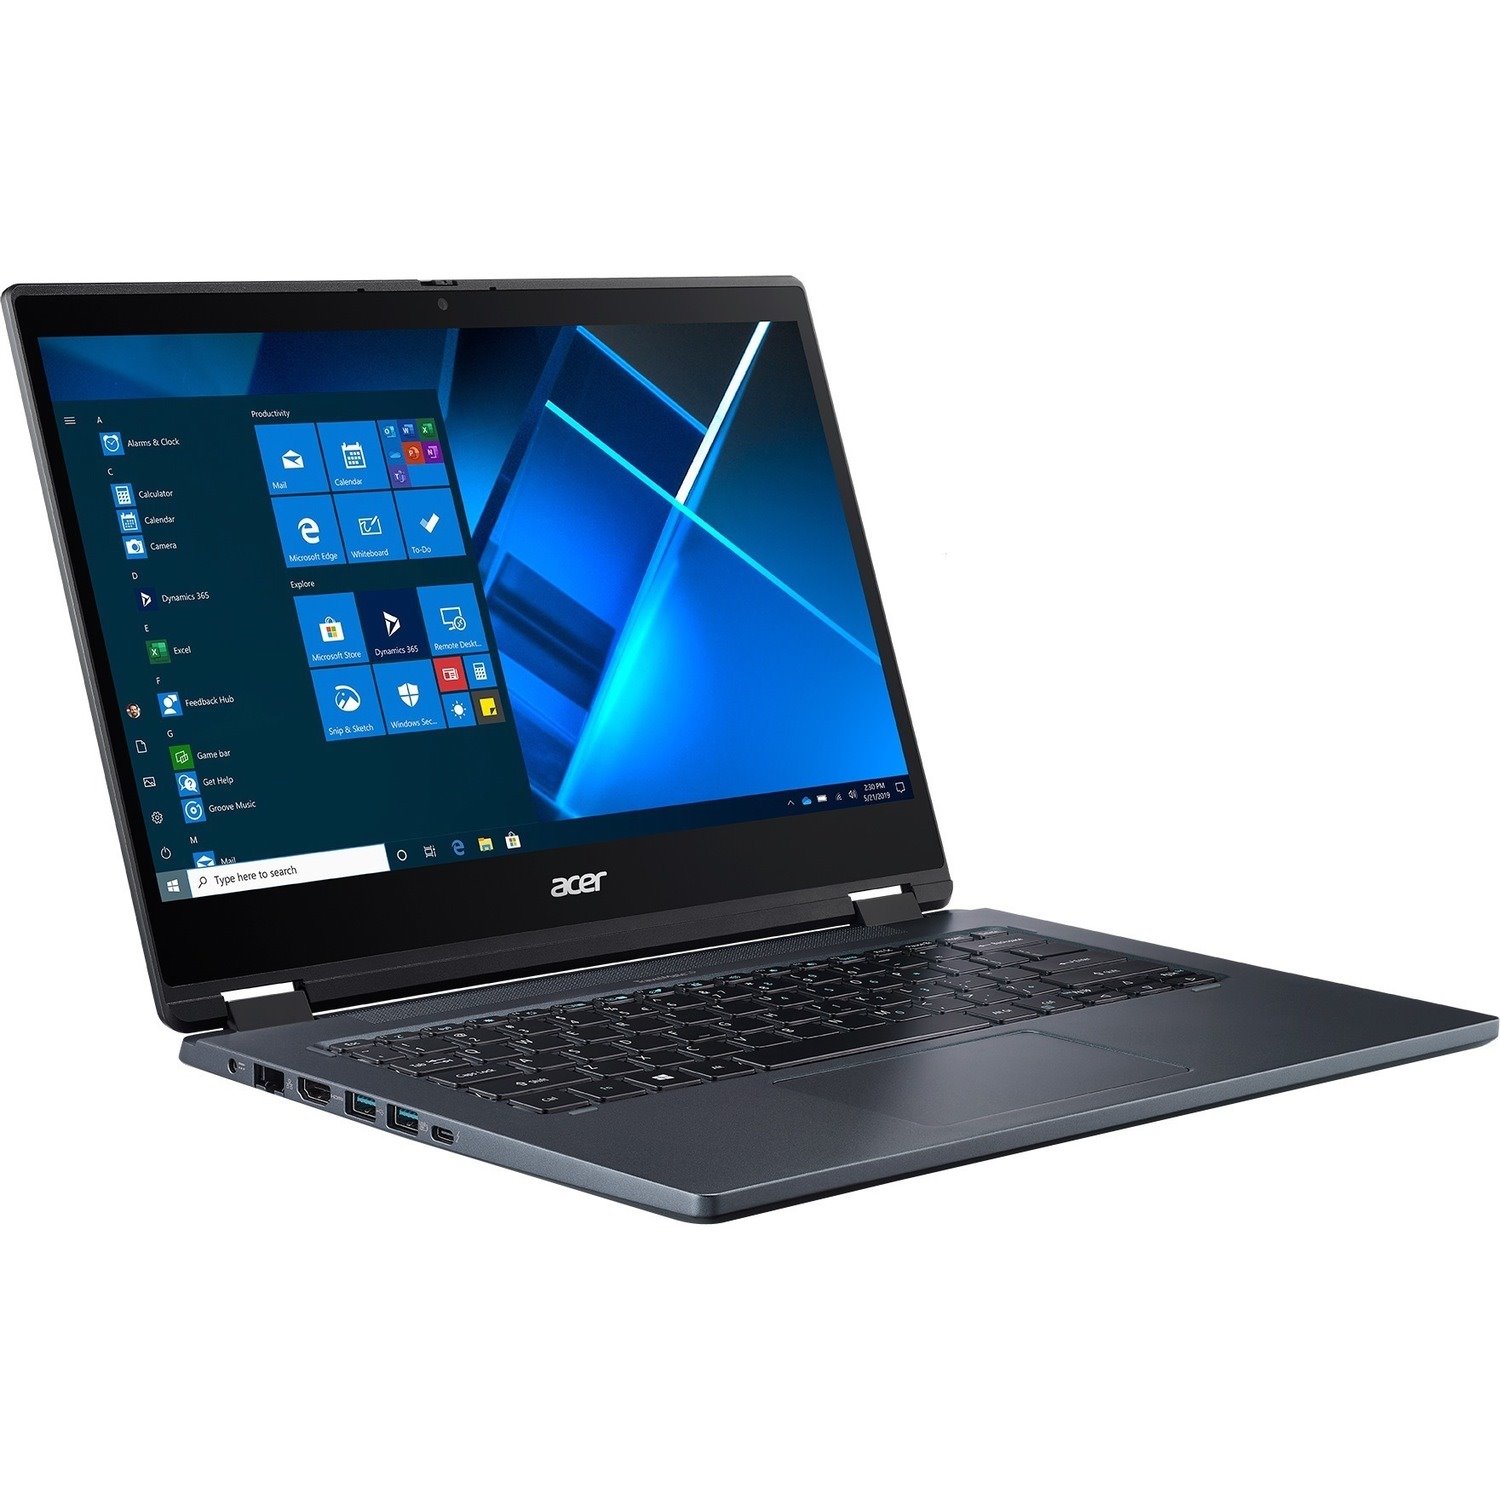 Acer TravelMate Spin P4 P414RN-51 TMP414RN-51-771P 14" Touchscreen Convertible 2 in 1 Notebook - Full HD - 1920 x 1080 - Intel Core i7 11th Gen i7-1165G7 Quad-core (4 Core) 2.80 GHz - 16 GB Total RAM - 256 GB SSD - Slate Blue